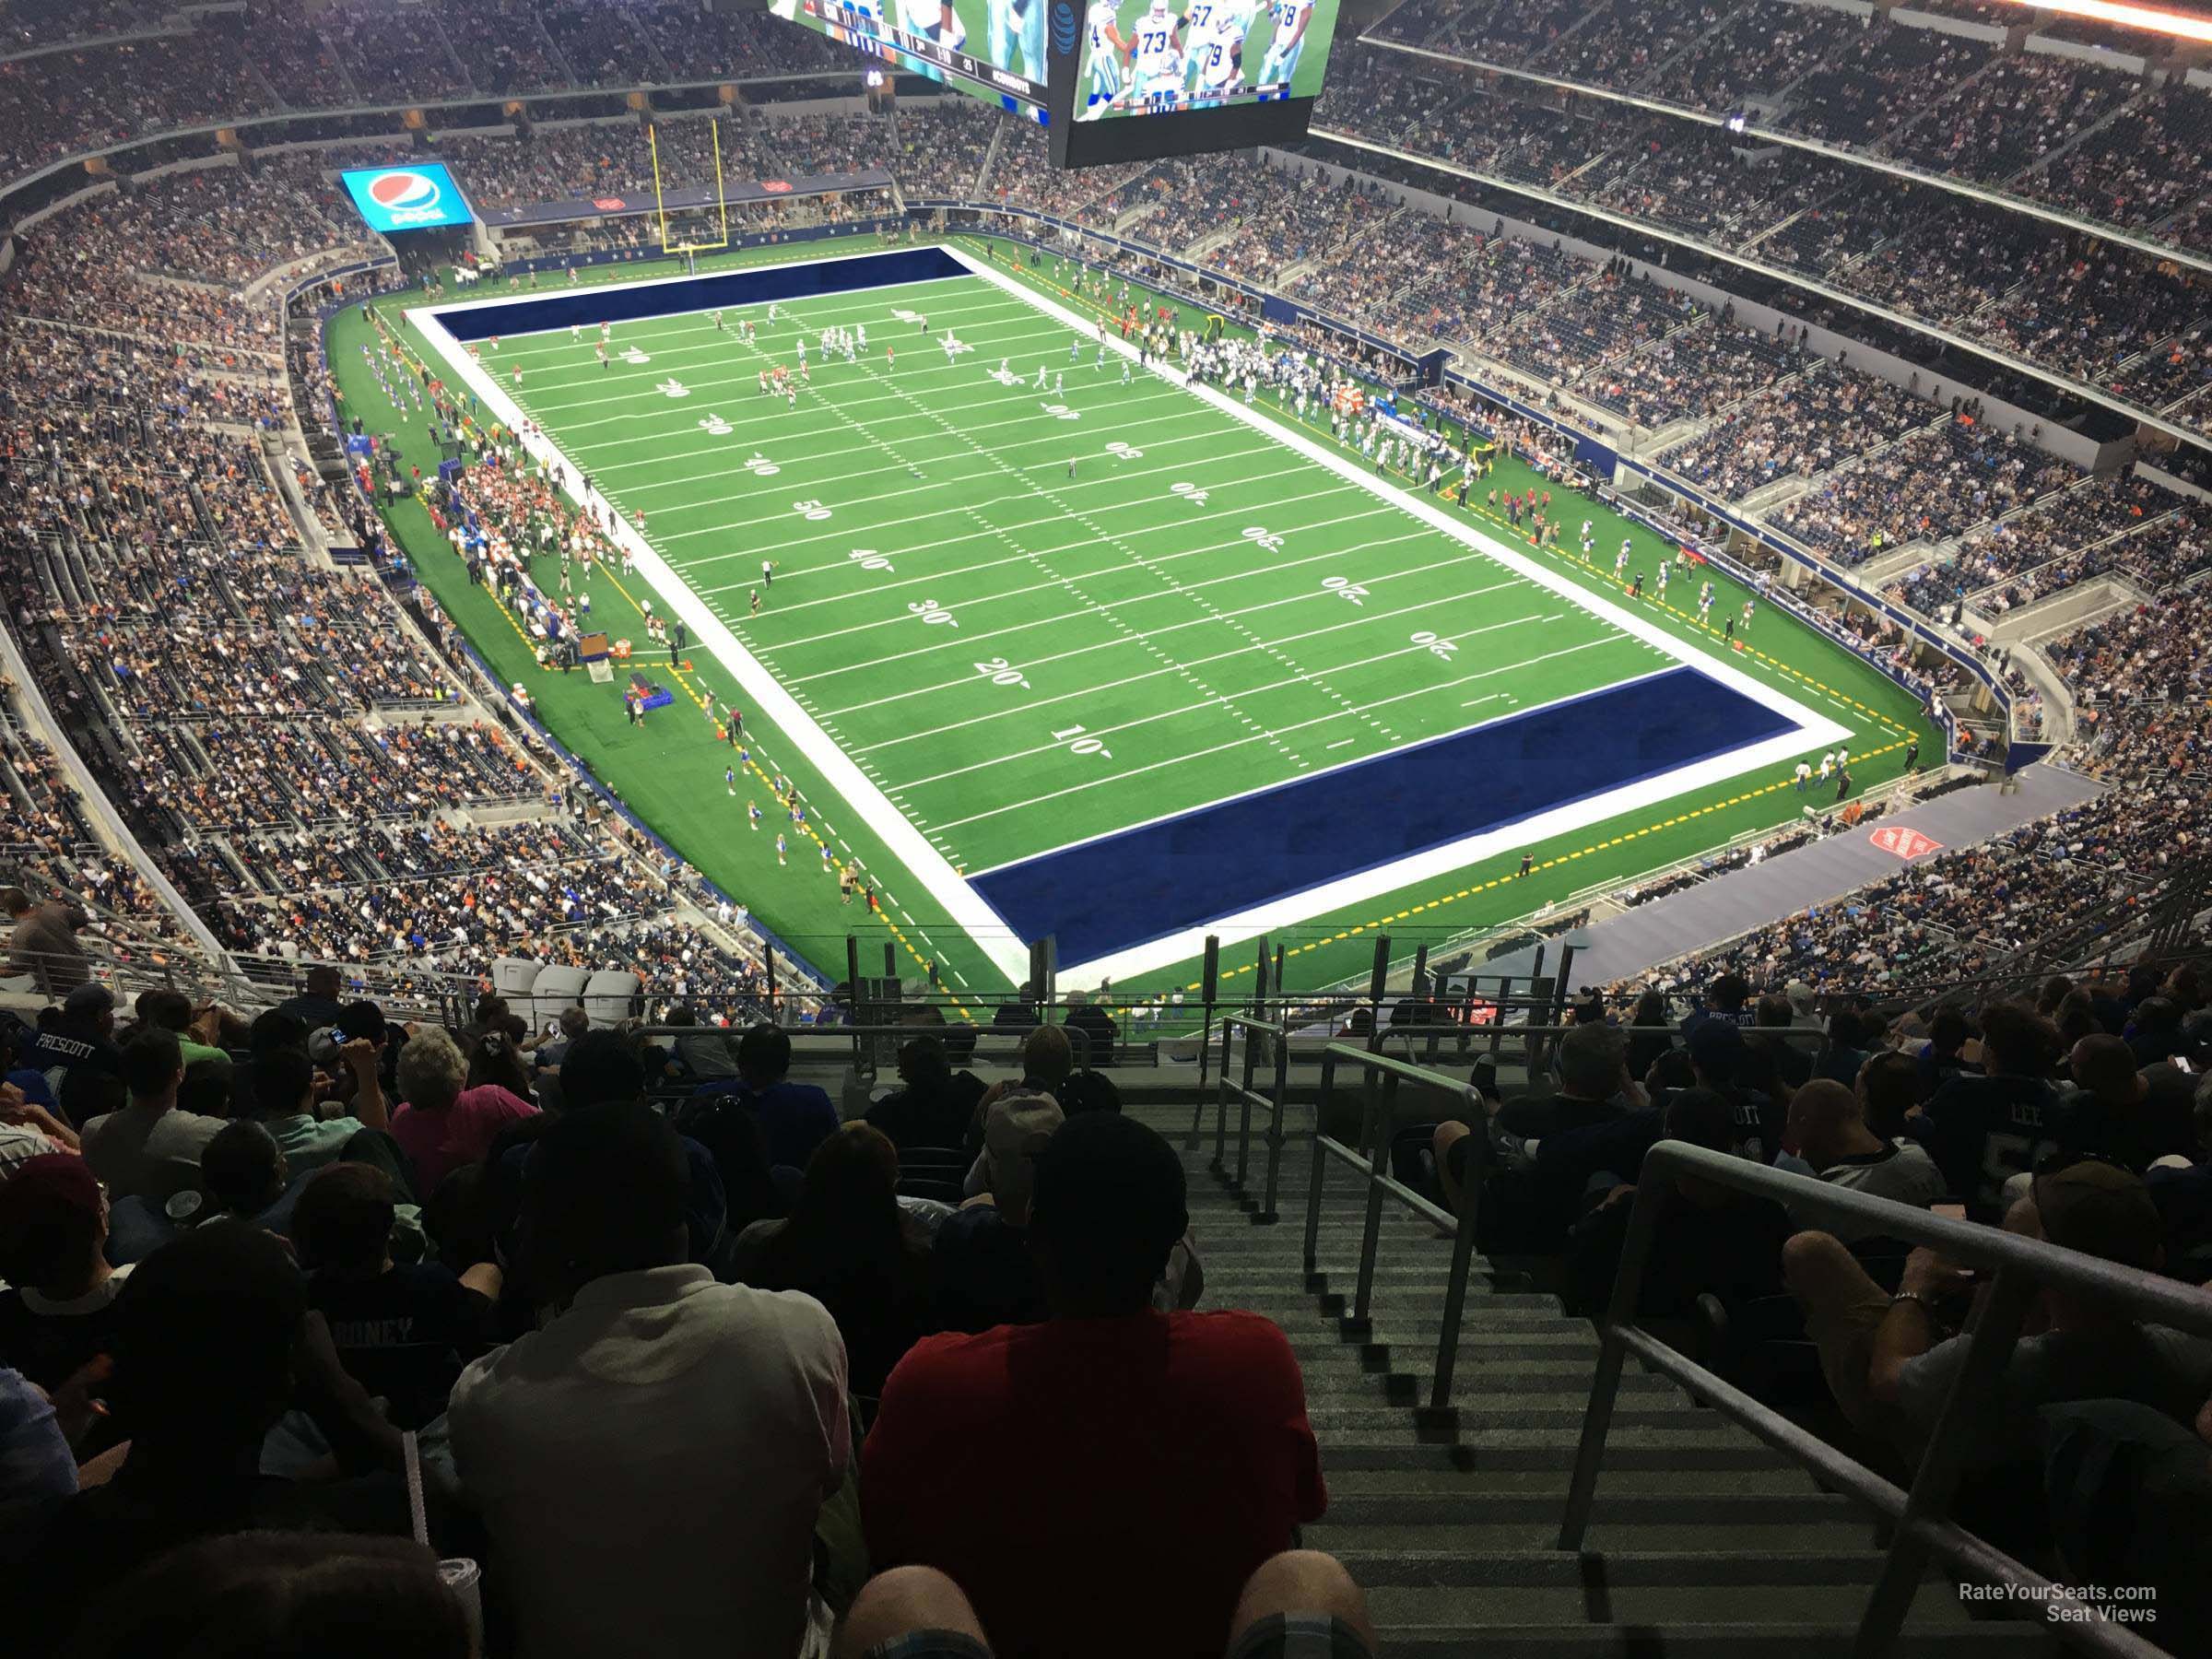 section 429, row 22 seat view  for football - at&t stadium (cowboys stadium)